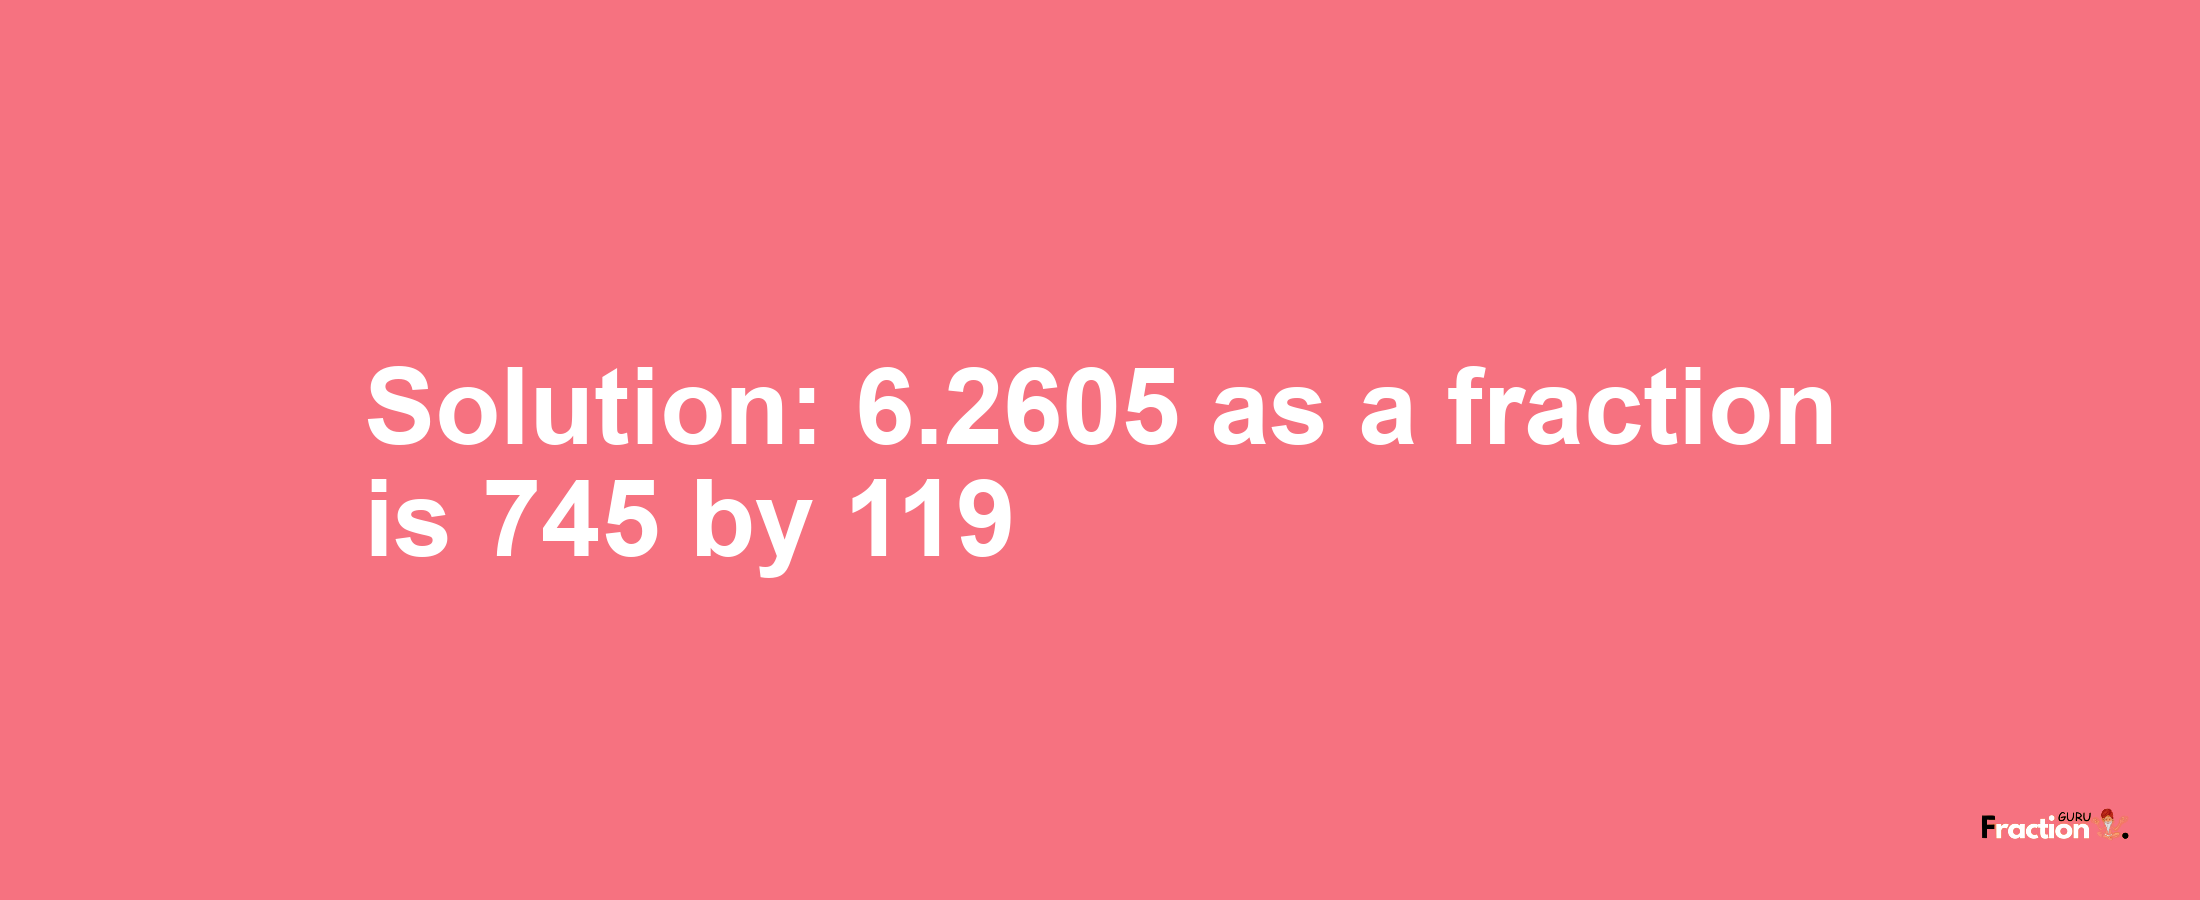 Solution:6.2605 as a fraction is 745/119